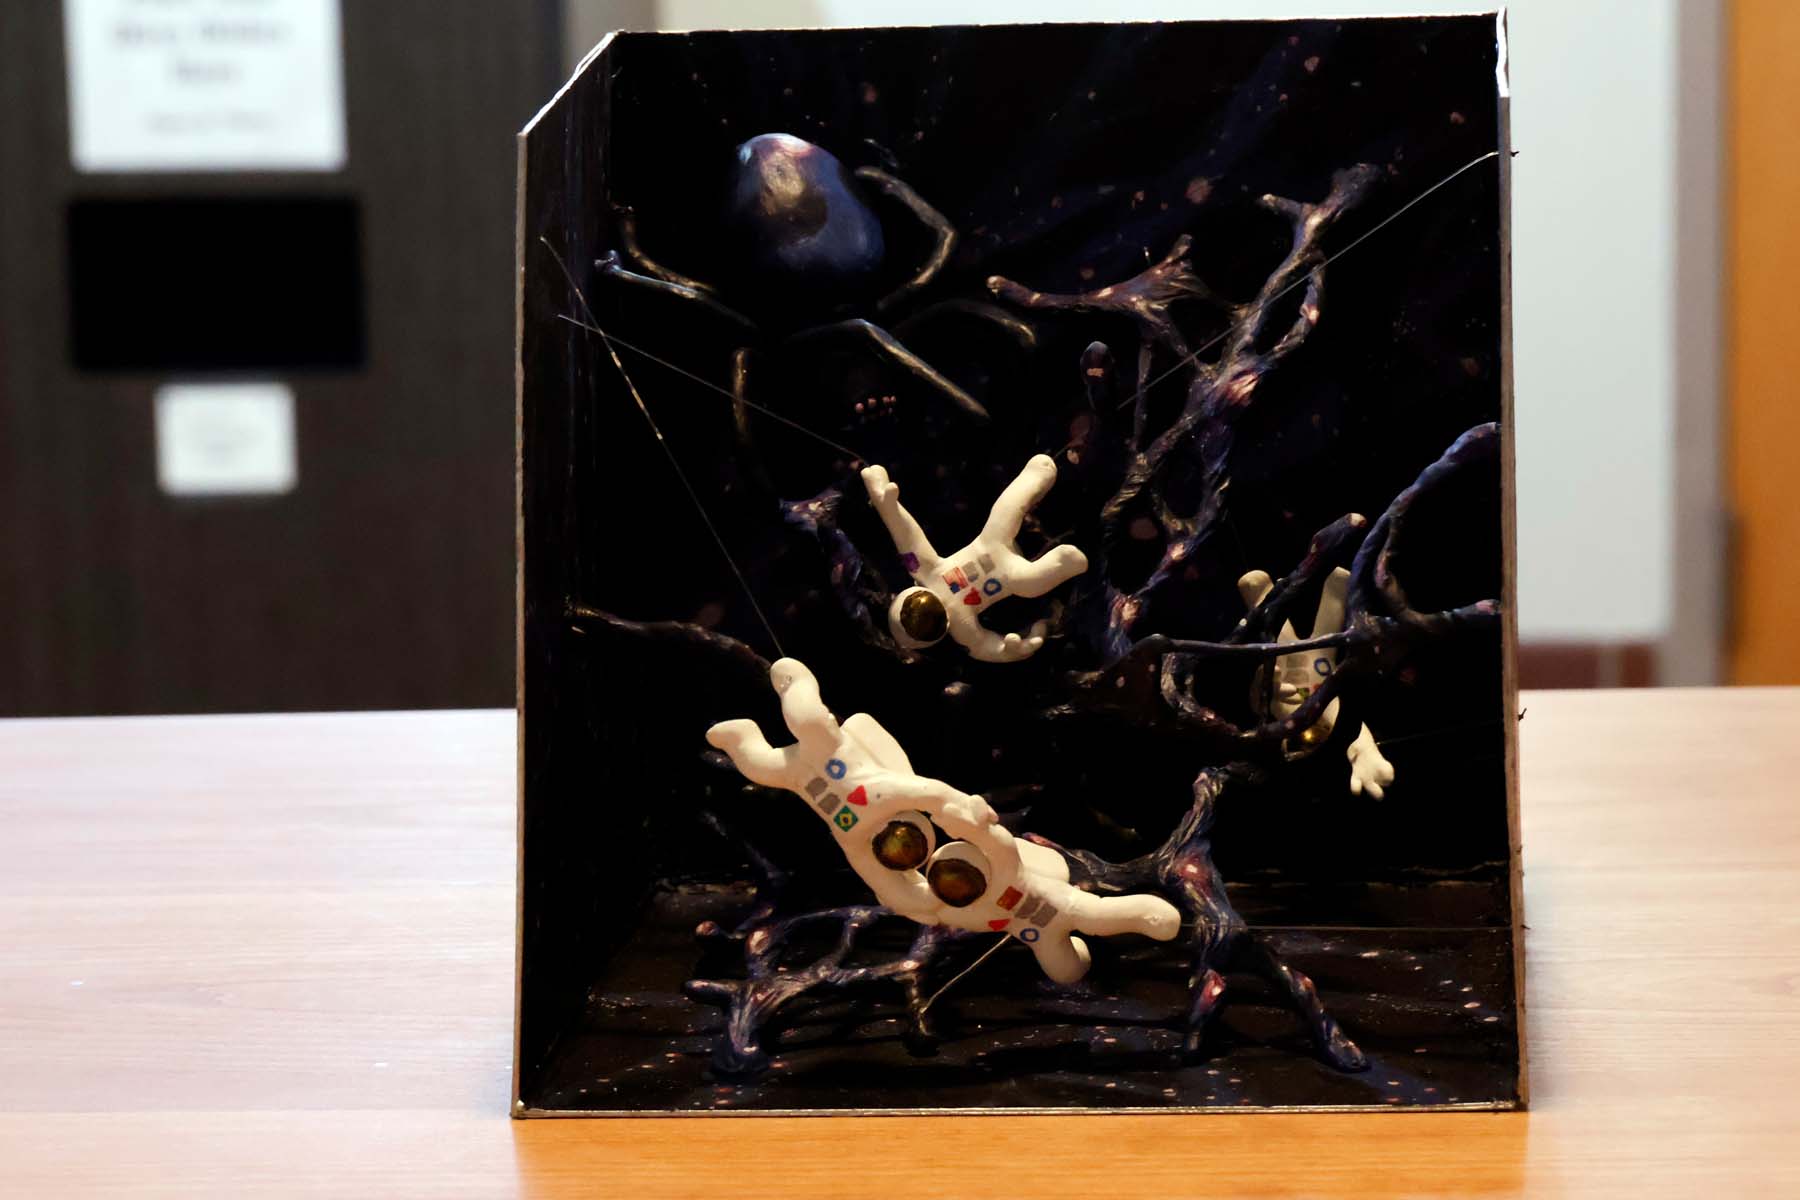 A cube, which is open on two sides (one opening facing us, the other facing above), sits on a table. The inside walls are painted with stars and between them stretch long, web-like filaments that carry the same starry pattern. In the upper left of the box, a cosmically colored spider straddles these threads while four astronauts float near various portions of the "web". The astronauts in the foreground are clutching each other's elbows, with helmets resting together; the astronauts are colinear such that a line would pass through the first's feet, then their touching helmets, then exit at the second's feet.